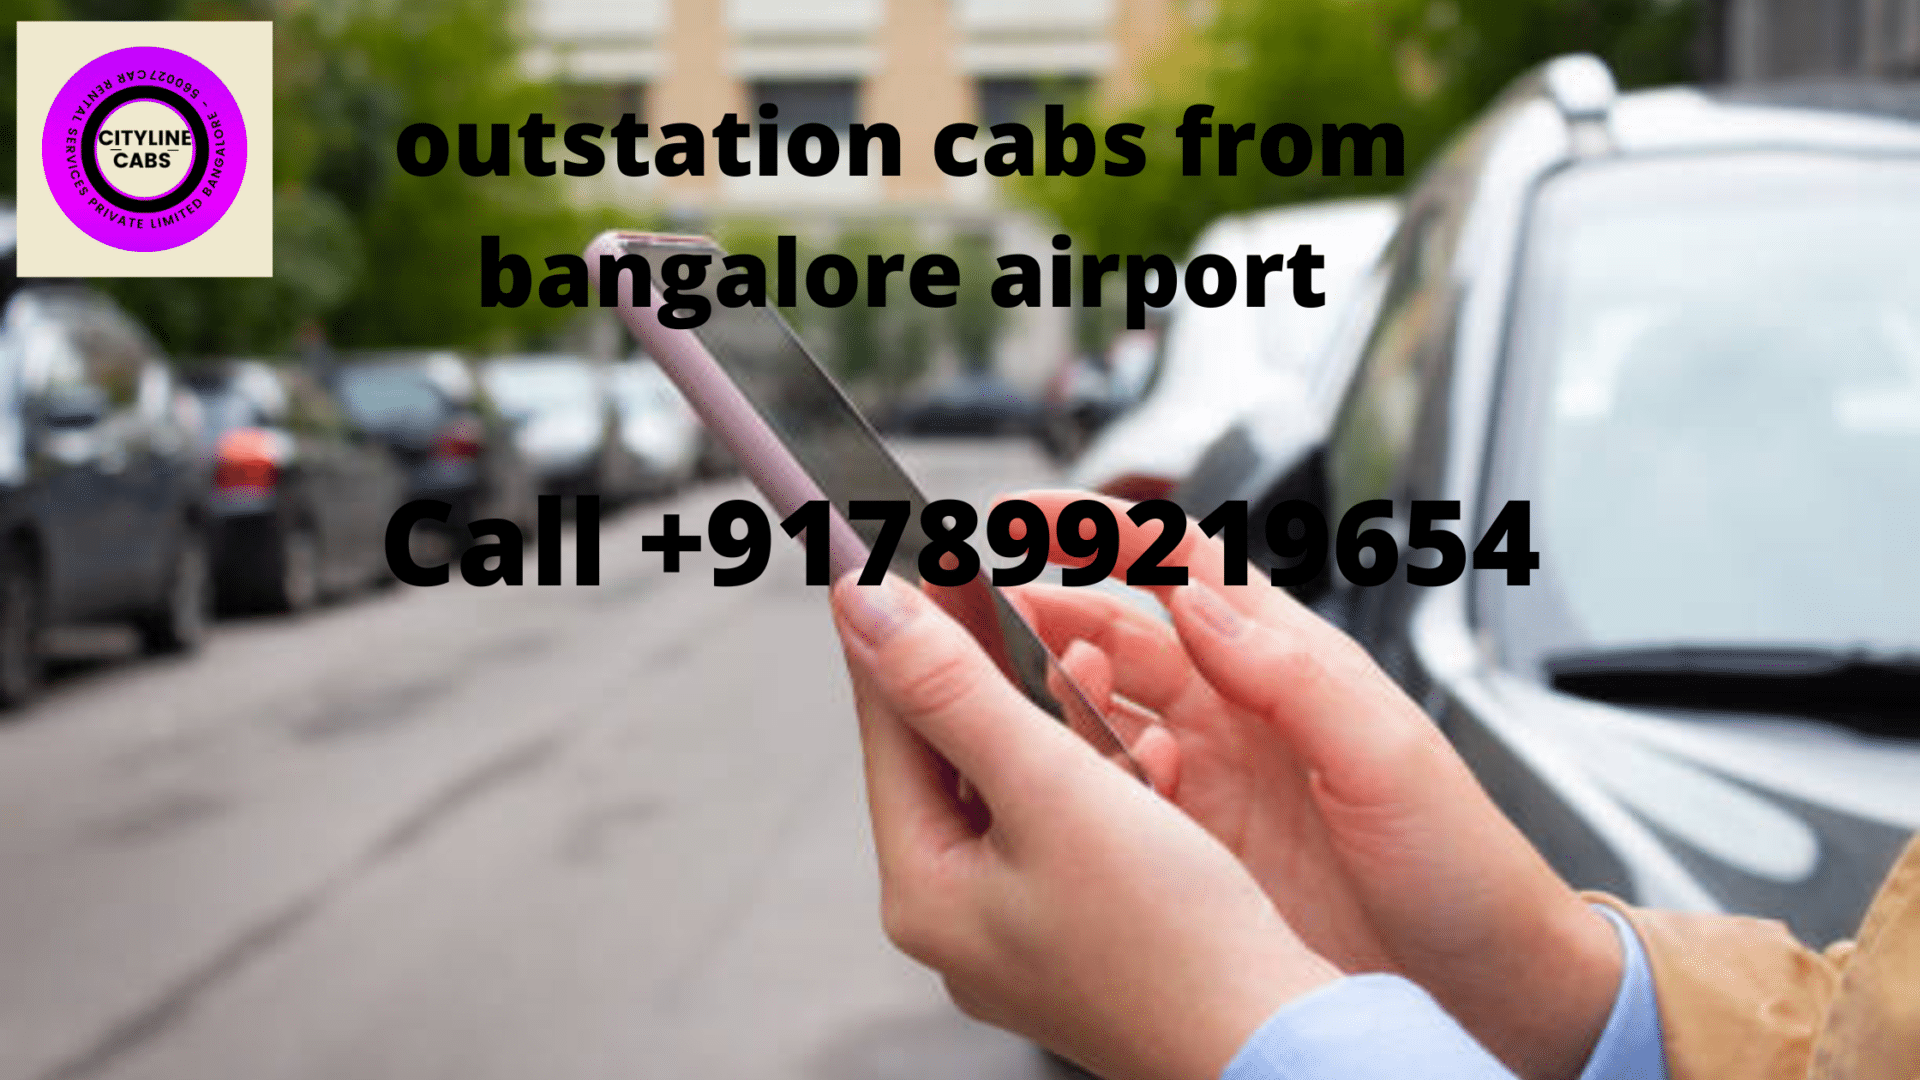 outstation cabs from bangalore airport